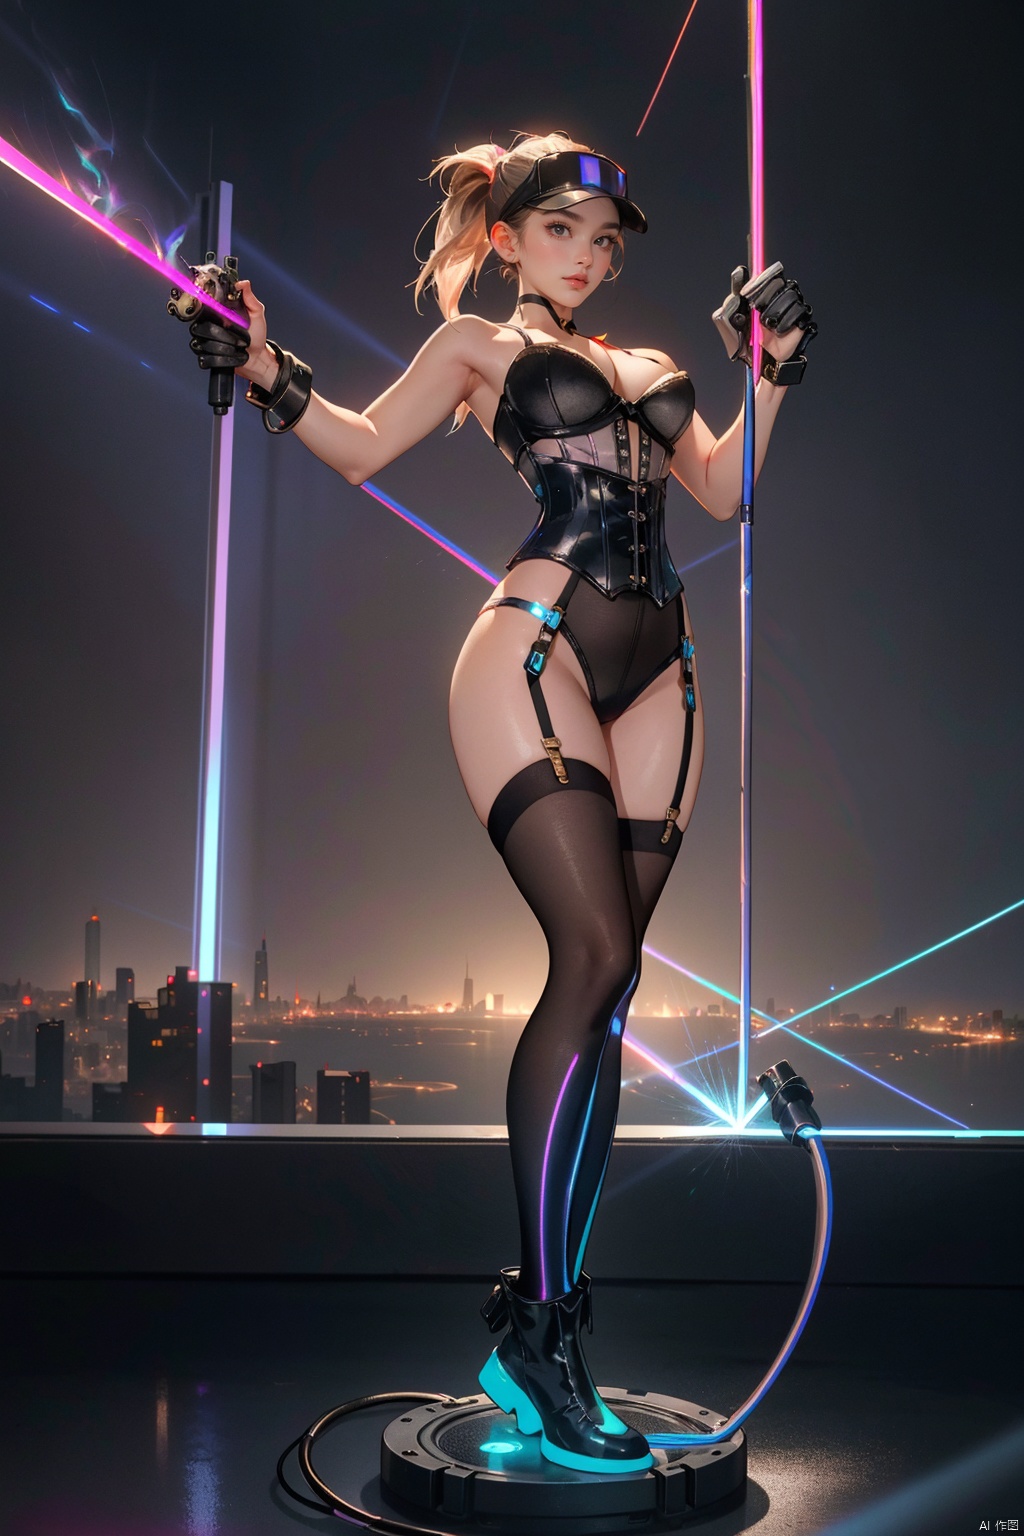 1girl, (mecha-maid), cyberpunk, (bustier with mechanical accents:1.6), (exposed circuitry details:1.3), futuristic thigh-high boots, (holographic visor:1.5), (artificial skin:0.9), (metallic accents:1.4), (dynamic pose:1.7), (plume of steam:1.2), (backdrop: neon cityscape:1.5), (tactical gloves:1.1), (synthetic hair in ponytail:1.3), (laser whip:1.8), (subtle glow effects:1.4), (shattered glass floor:0.8), floating holographic interface, (implant ports:1.1), confident stance, elongated limbs, smoke effects., ((poakl)), , (wide shot:0.95), (Dynamic pose:1.4),